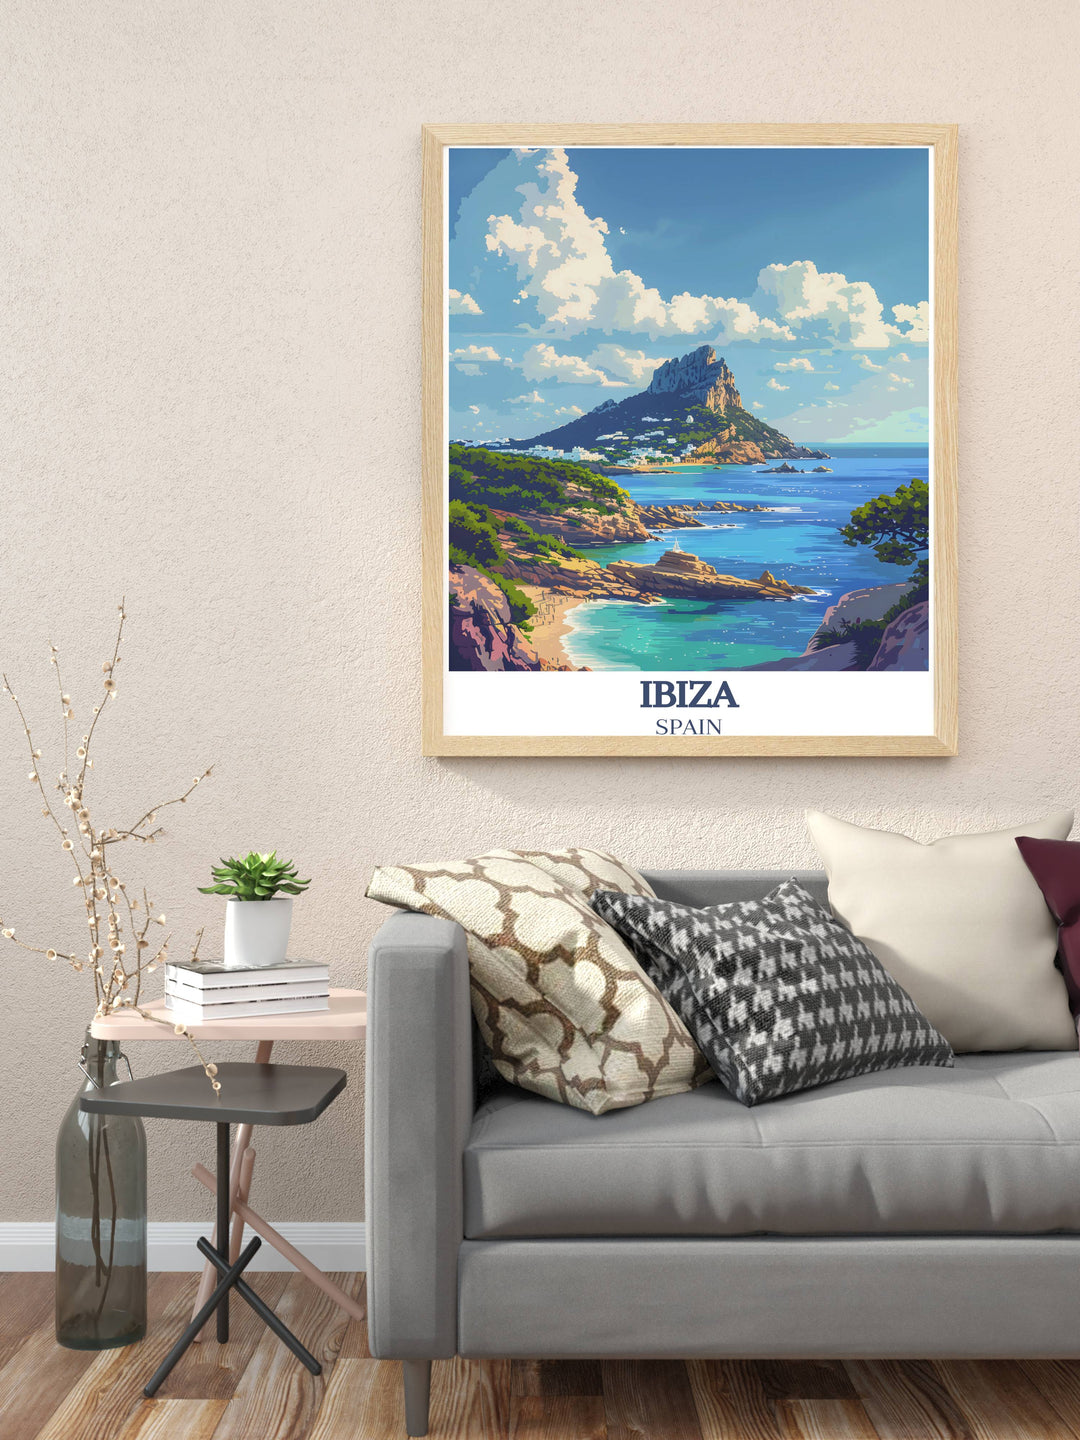 Ocean Beach Club artwork combined with the enchanting Es Vedra Digital print creating a unique wall art piece that celebrates both the lively dance music art of Ibiza and the serene beauty of Es Vedra